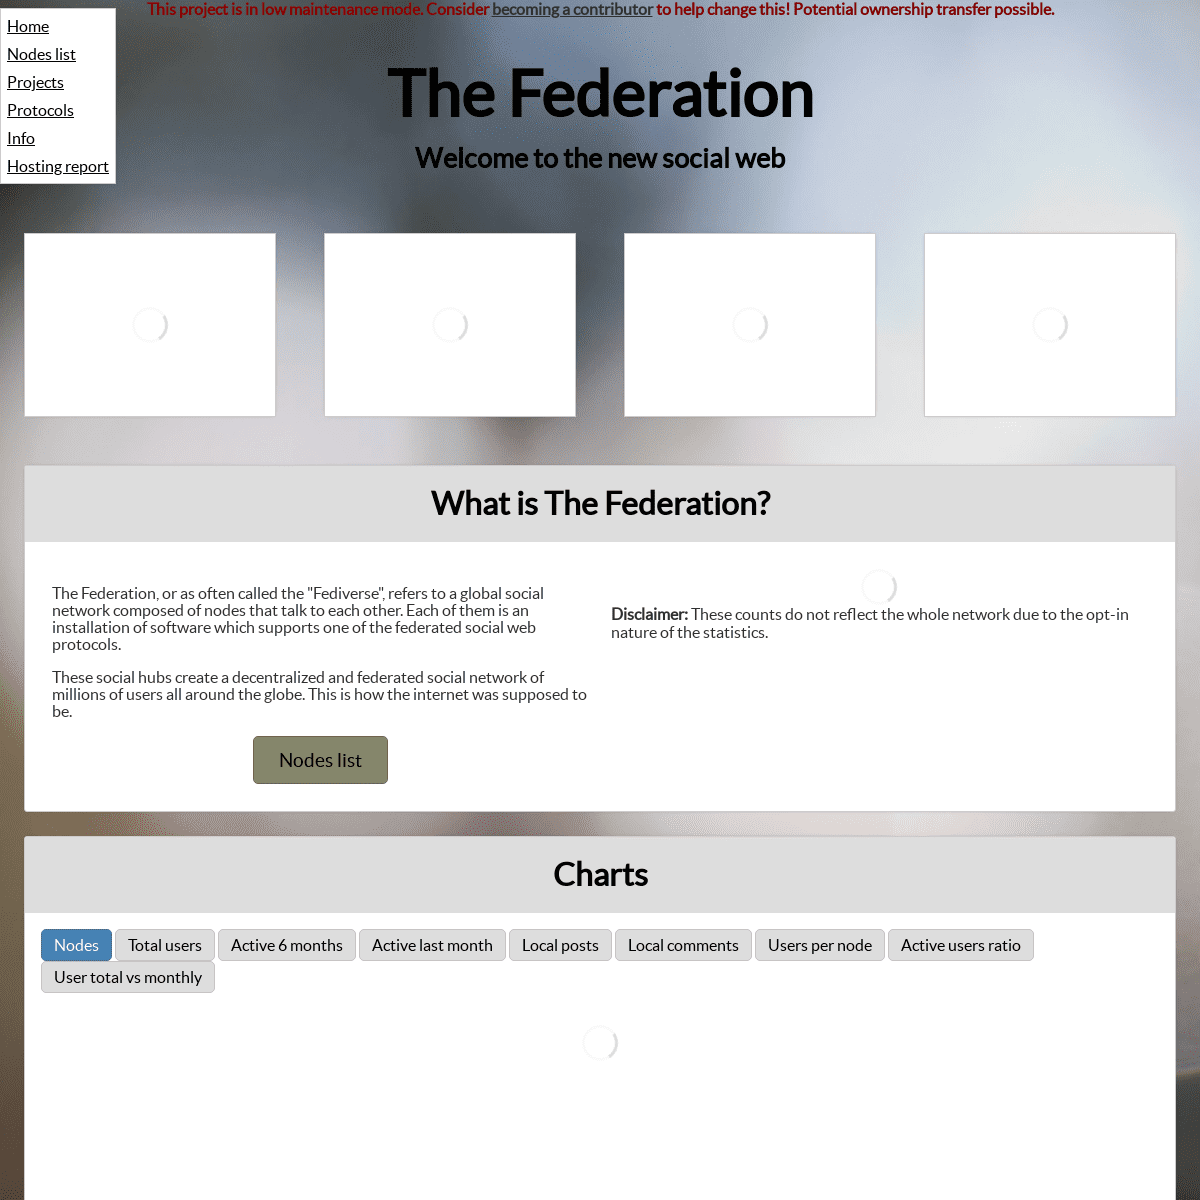 A complete backup of https://the-federation.info